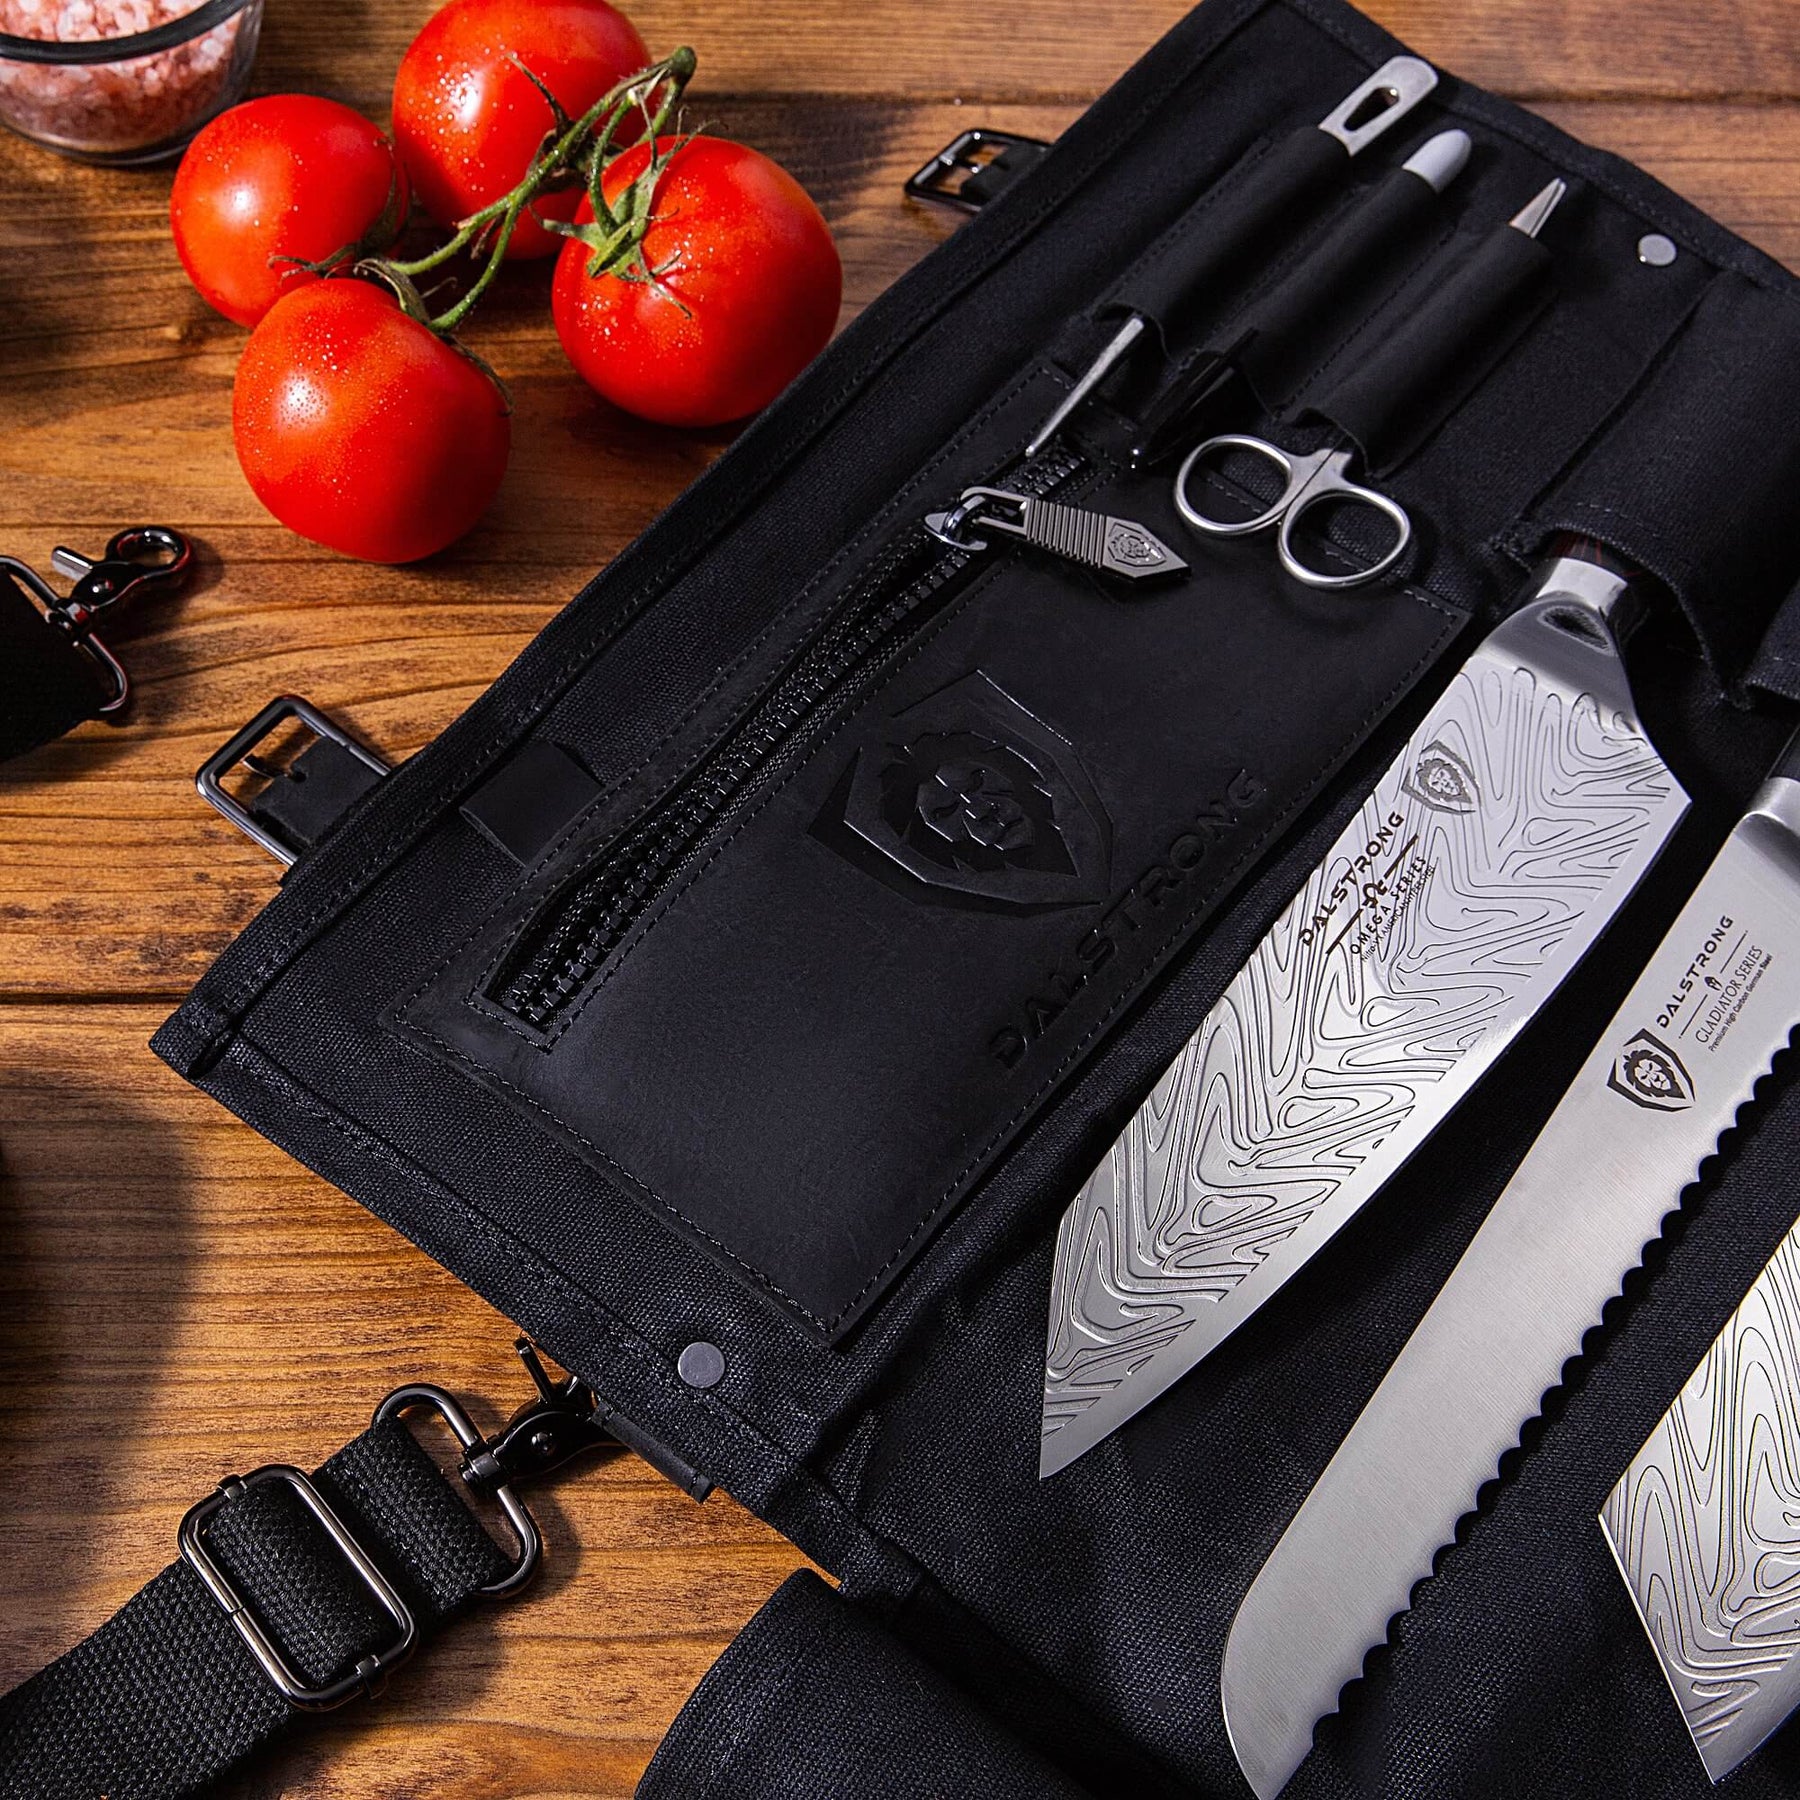 Leather Knife Rolls: Why Your Knives Need Them – Dalstrong